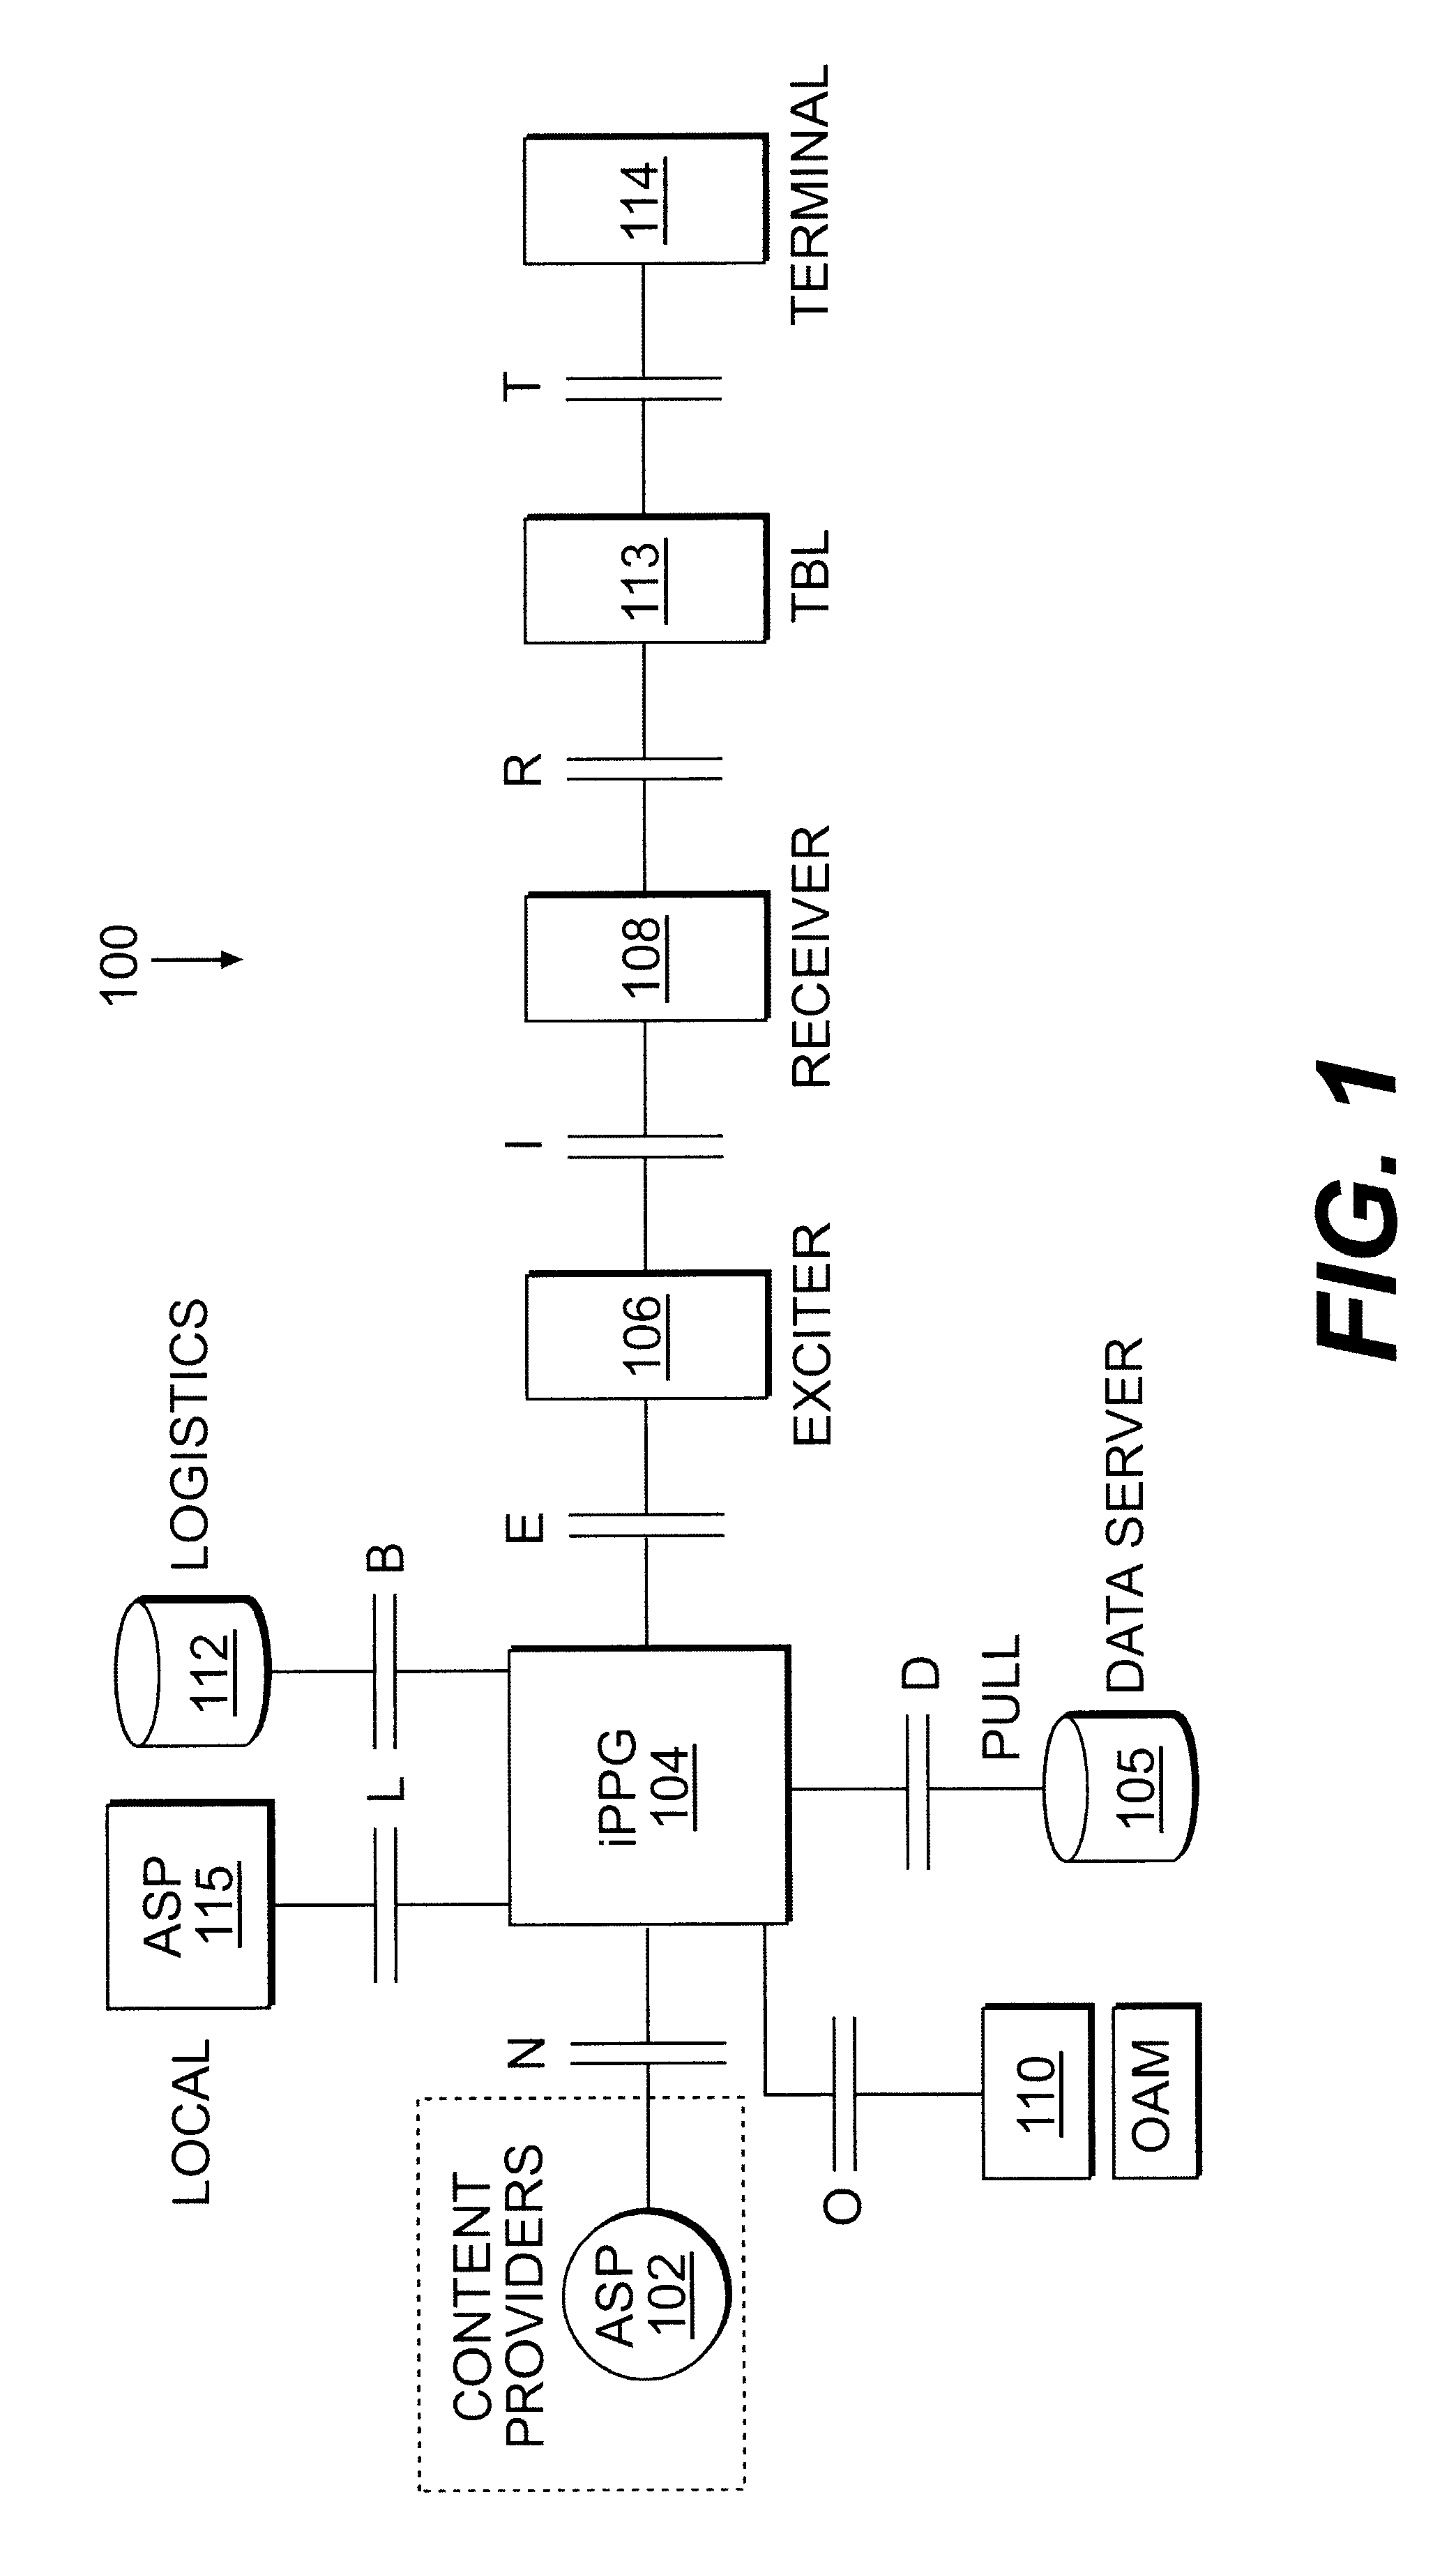 System and method for a push-pull gateway-directed digital receiver